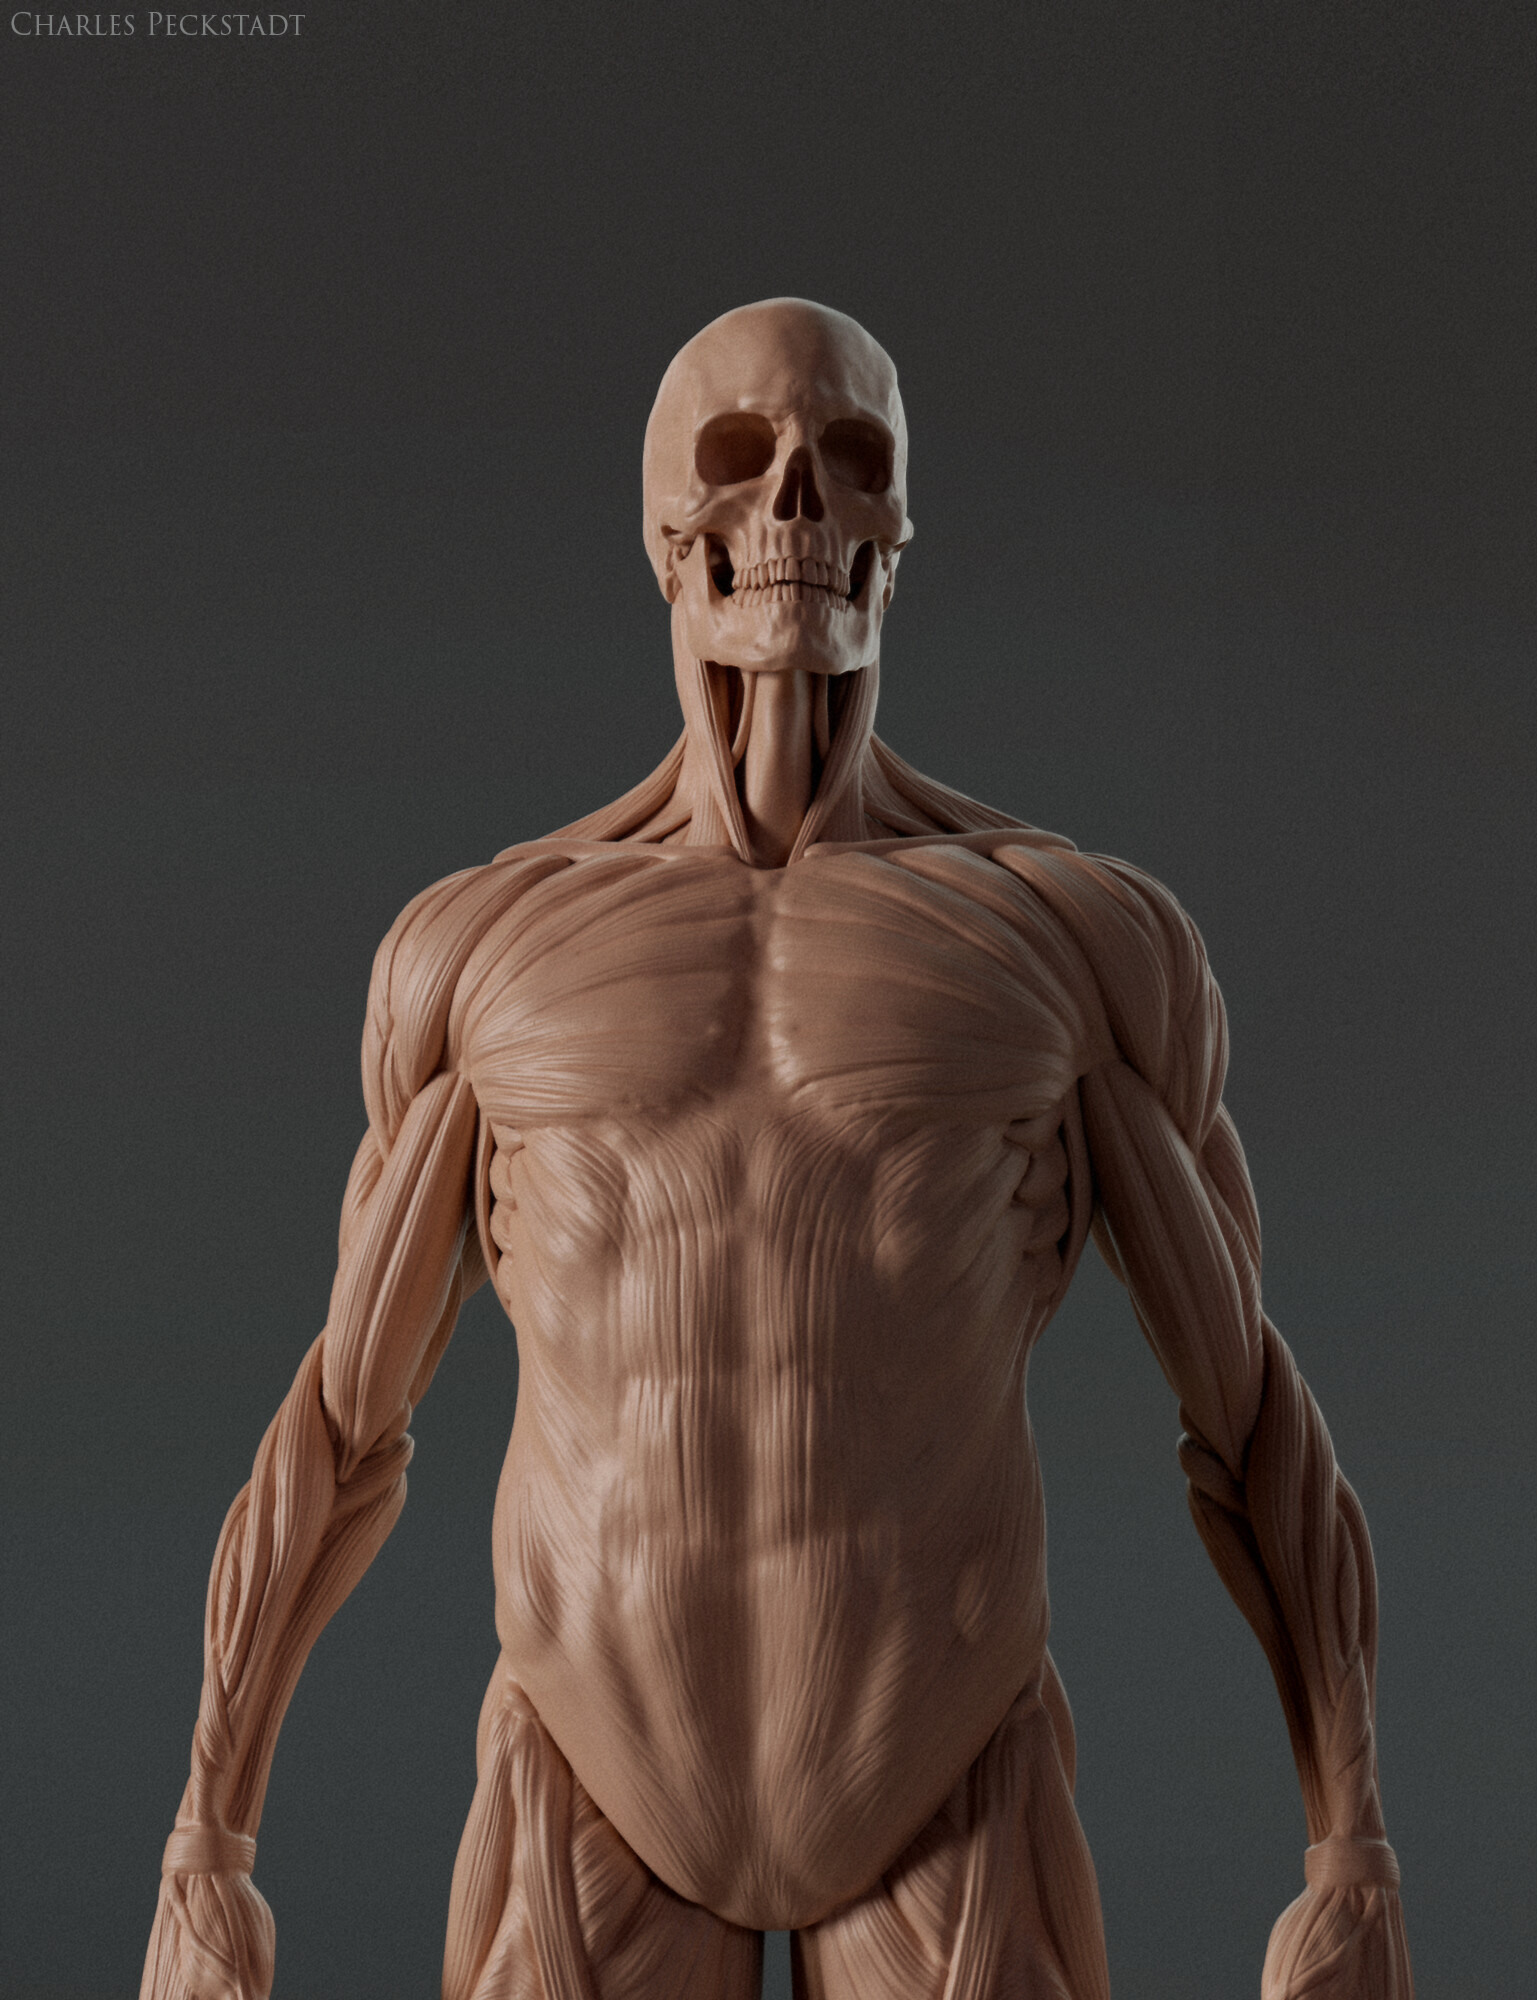 ArtStation - Digital 3D Ecorche - Anatomy reference | Resources